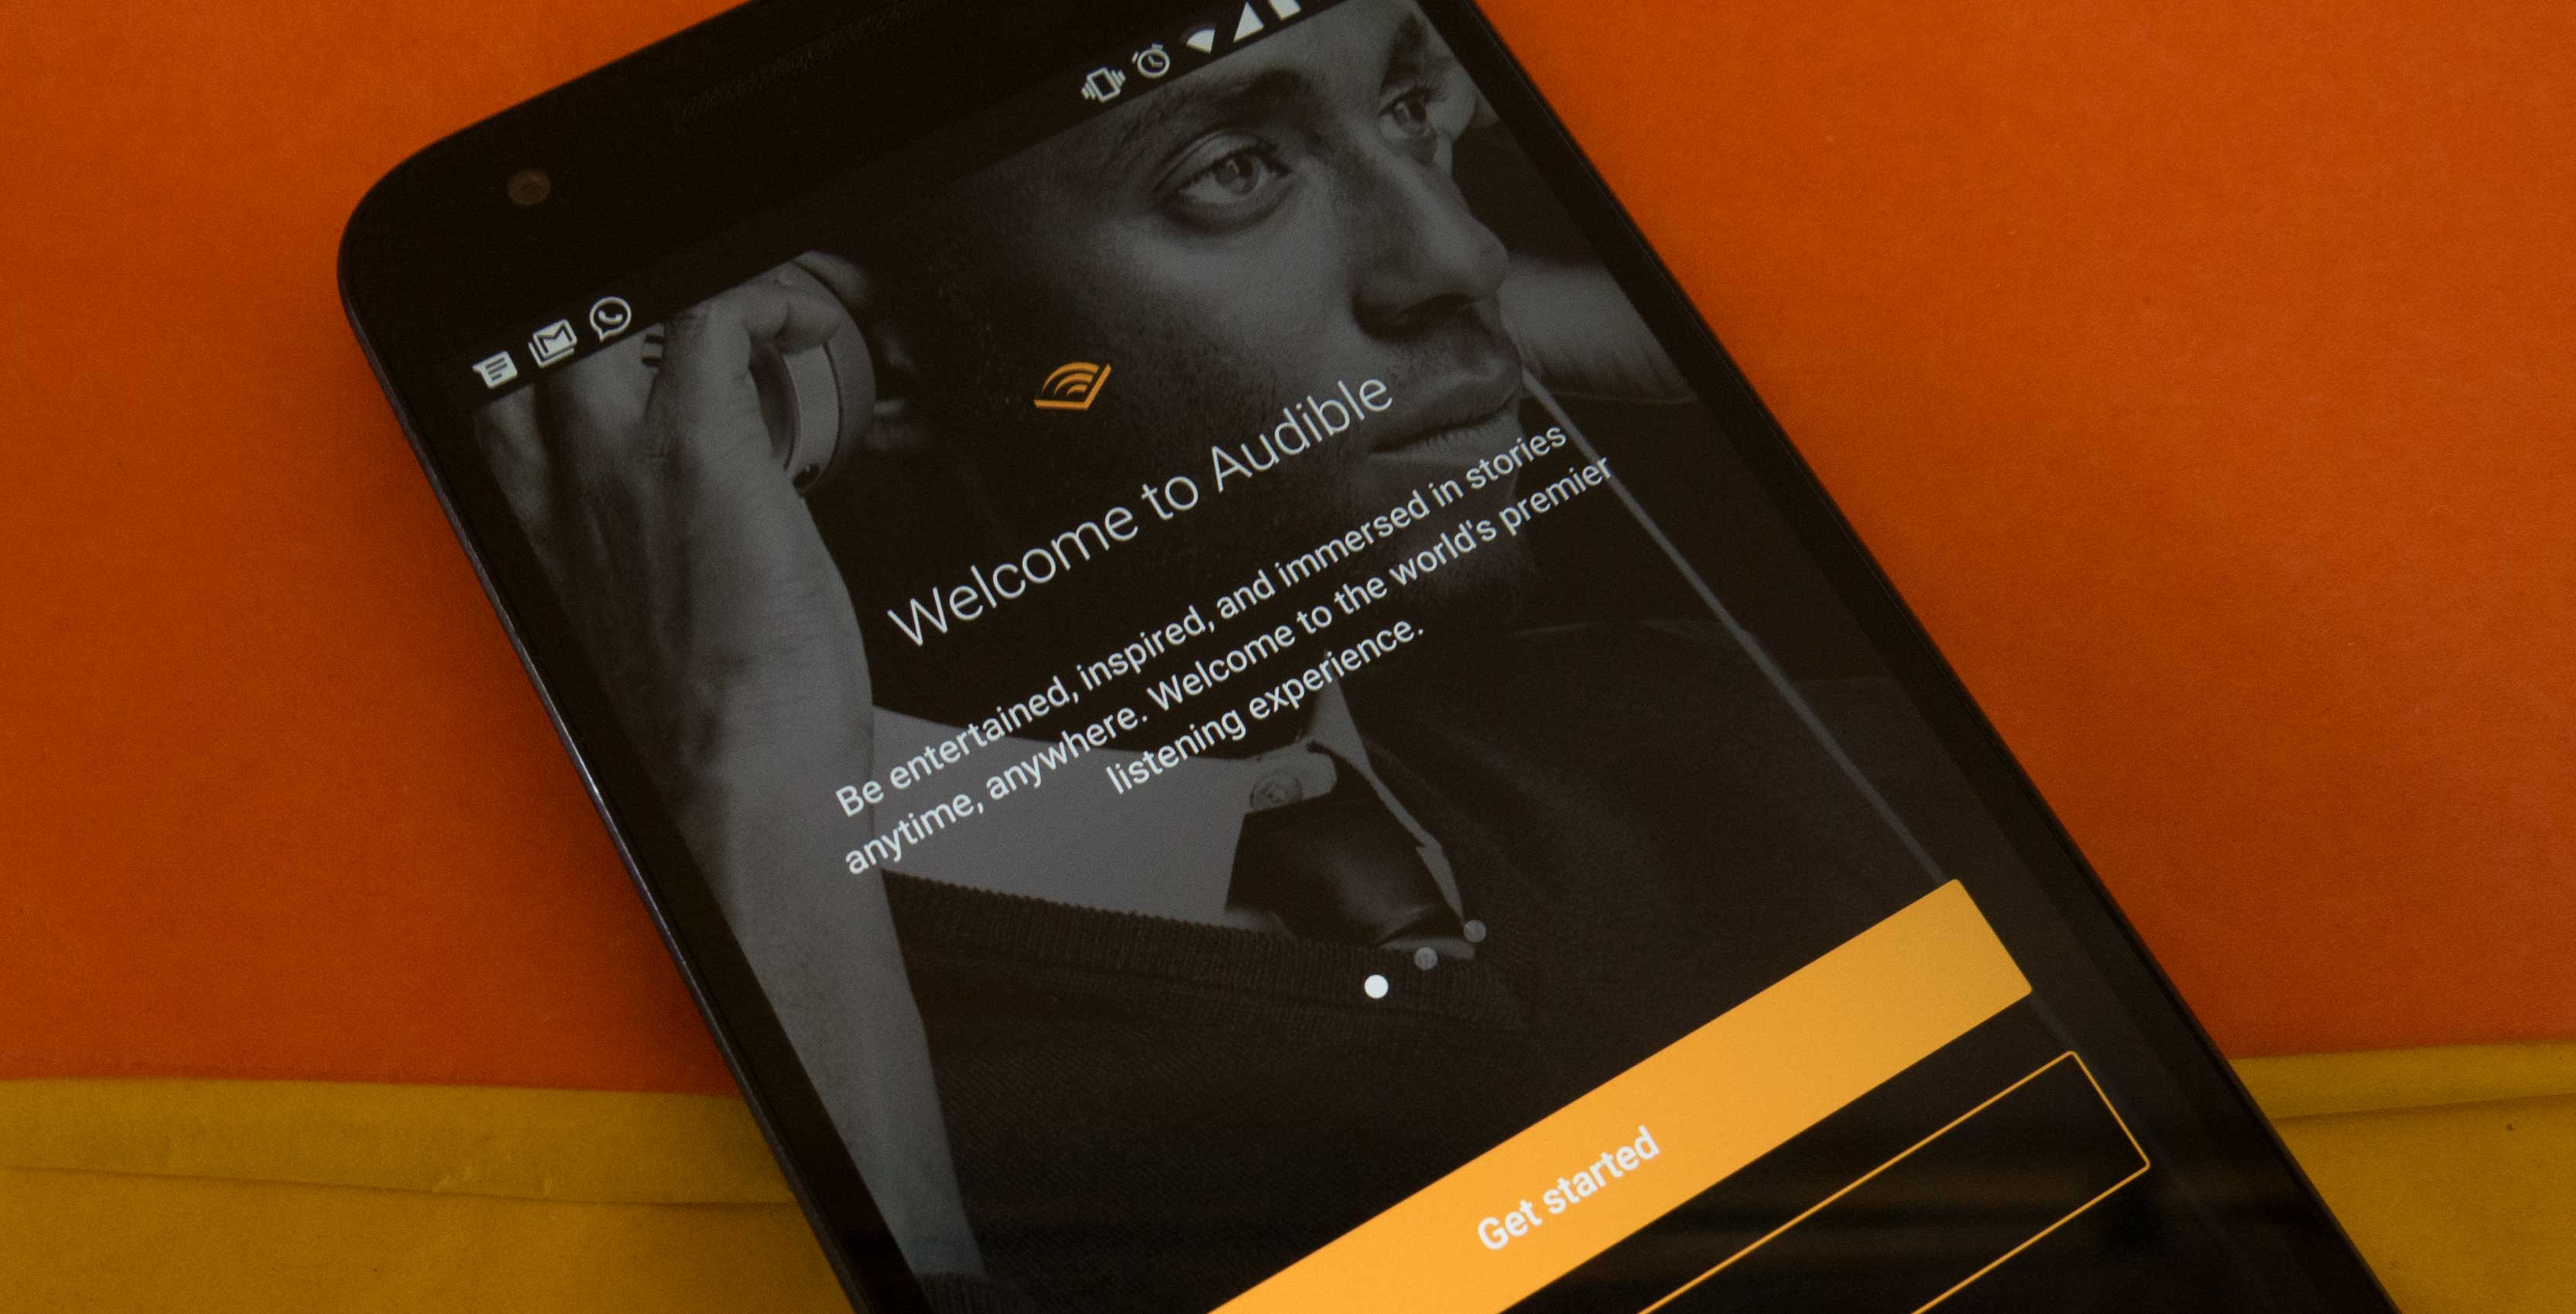 An image of the Audible login page